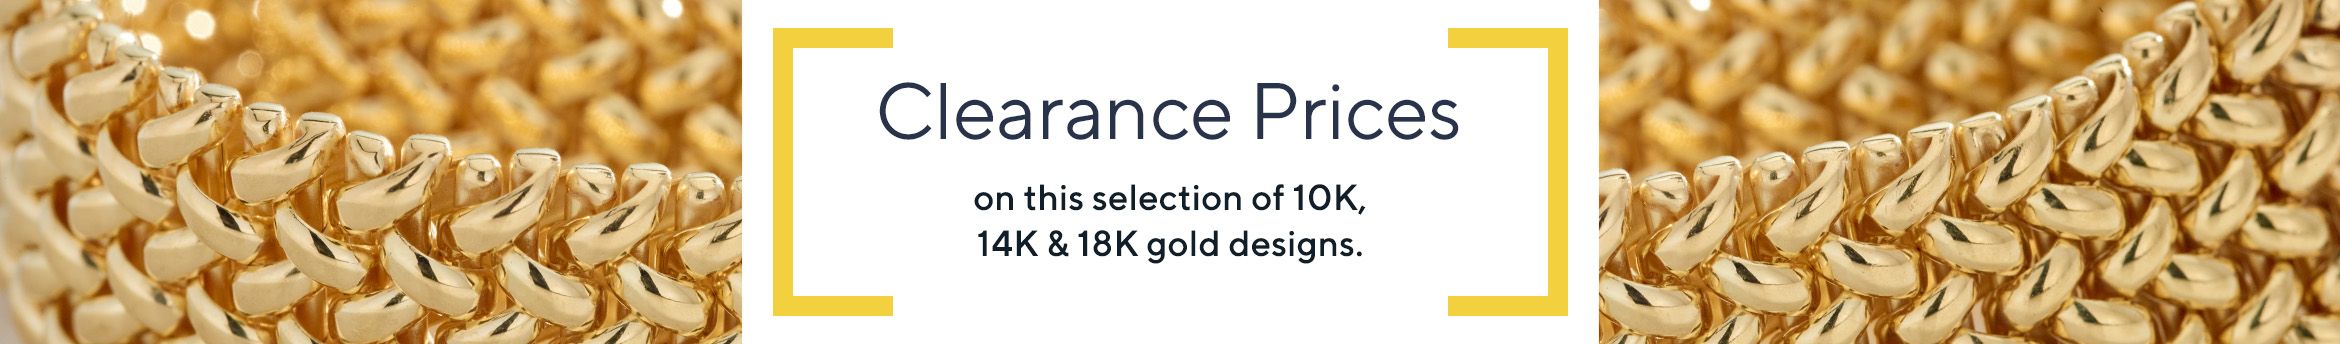 Clearance Prices on this selection of 10K, 14K & 18K gold designs.